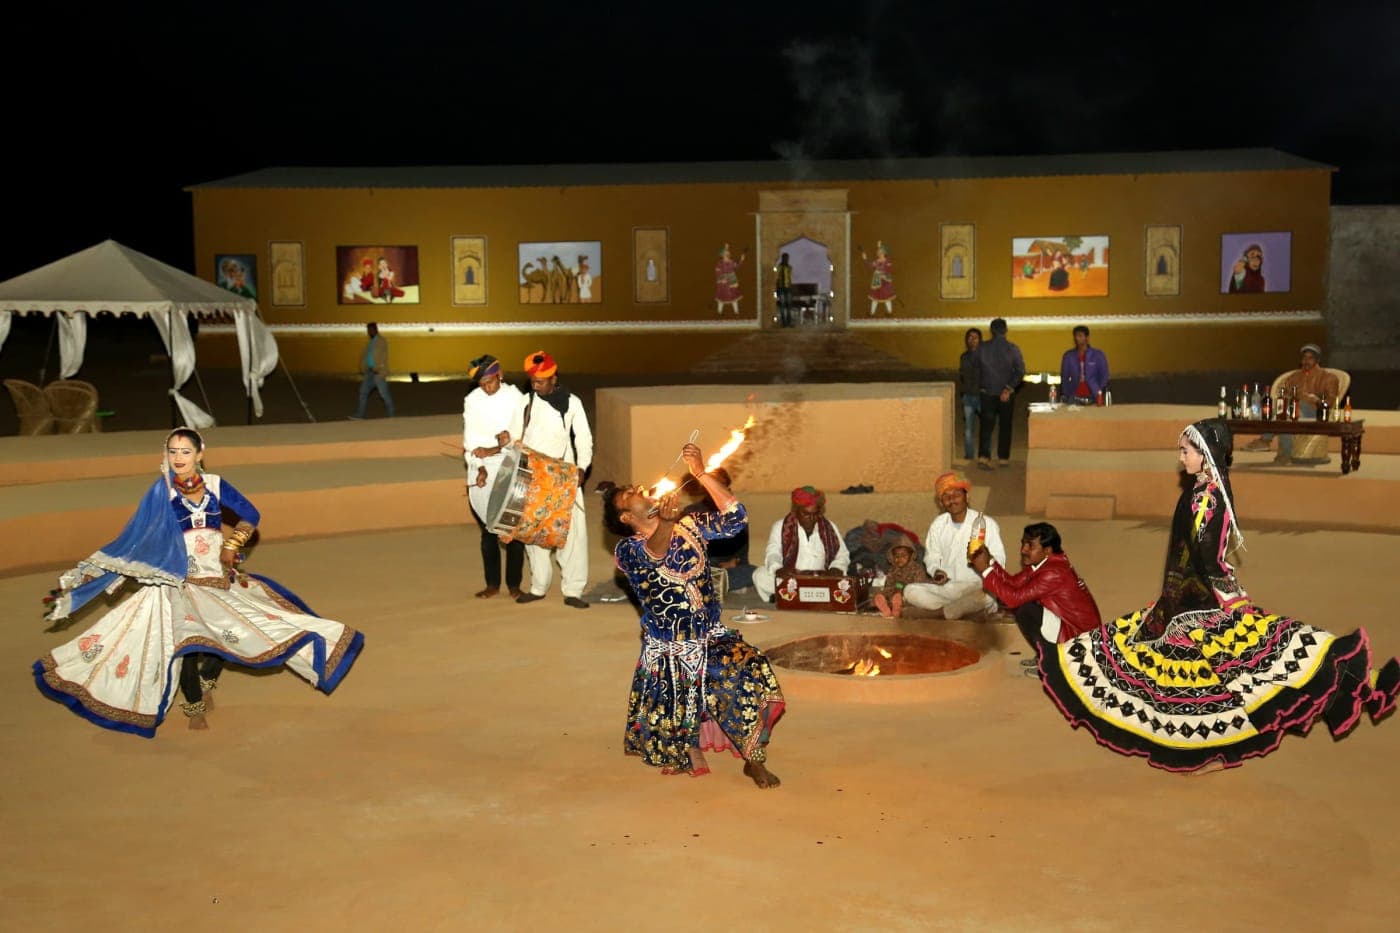 Evening with Cultural Folk Dance followed by Dinner in Jaisalmer at Exotic Luxury Camps